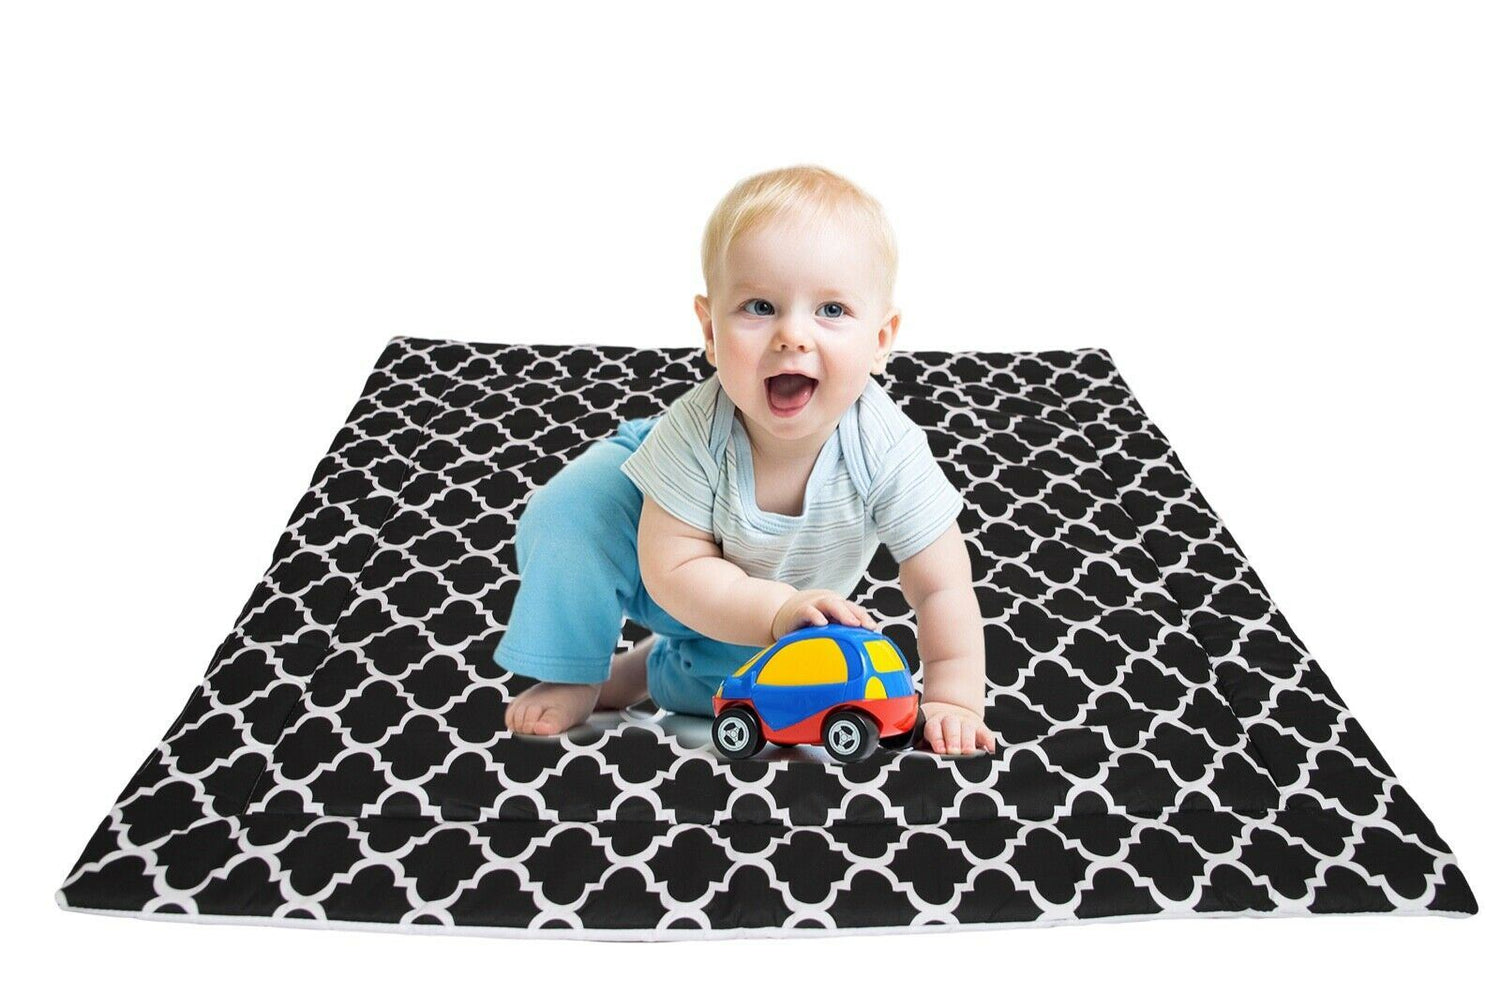 Teepee floor Double sided Cotton Padded Baby Kids Play Mat Moroccan dream